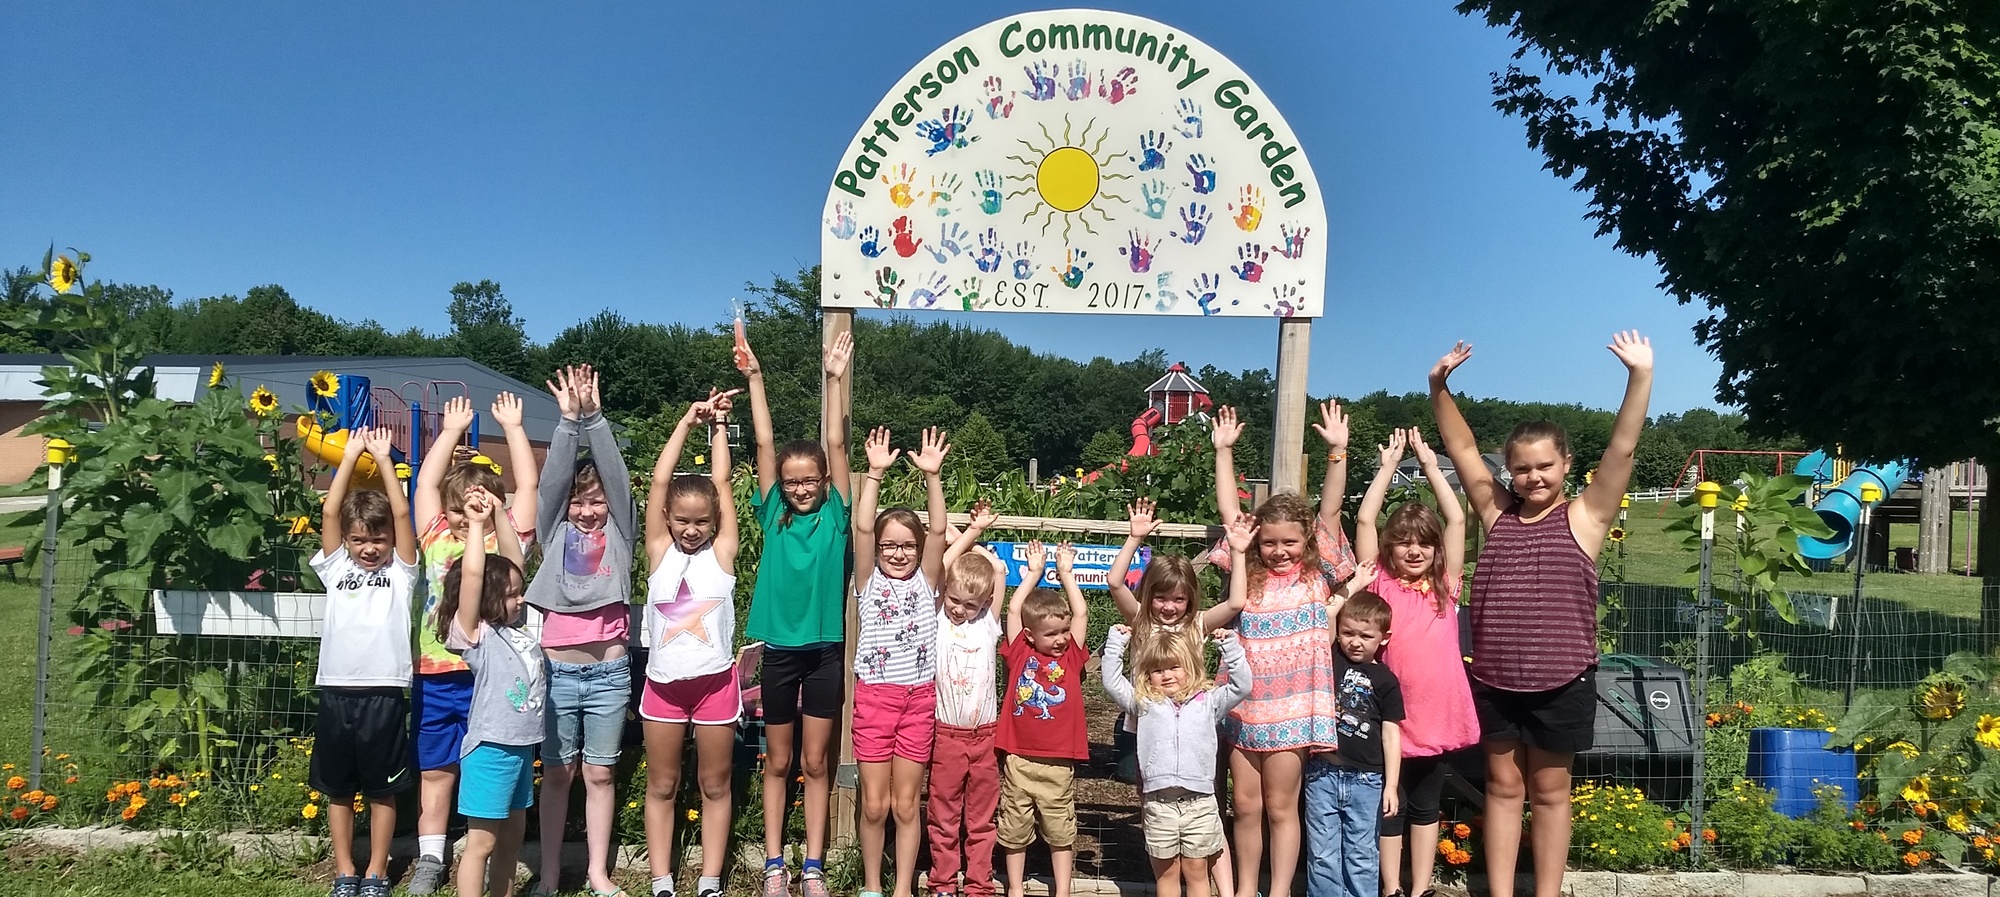 Students in front of the community garden sign